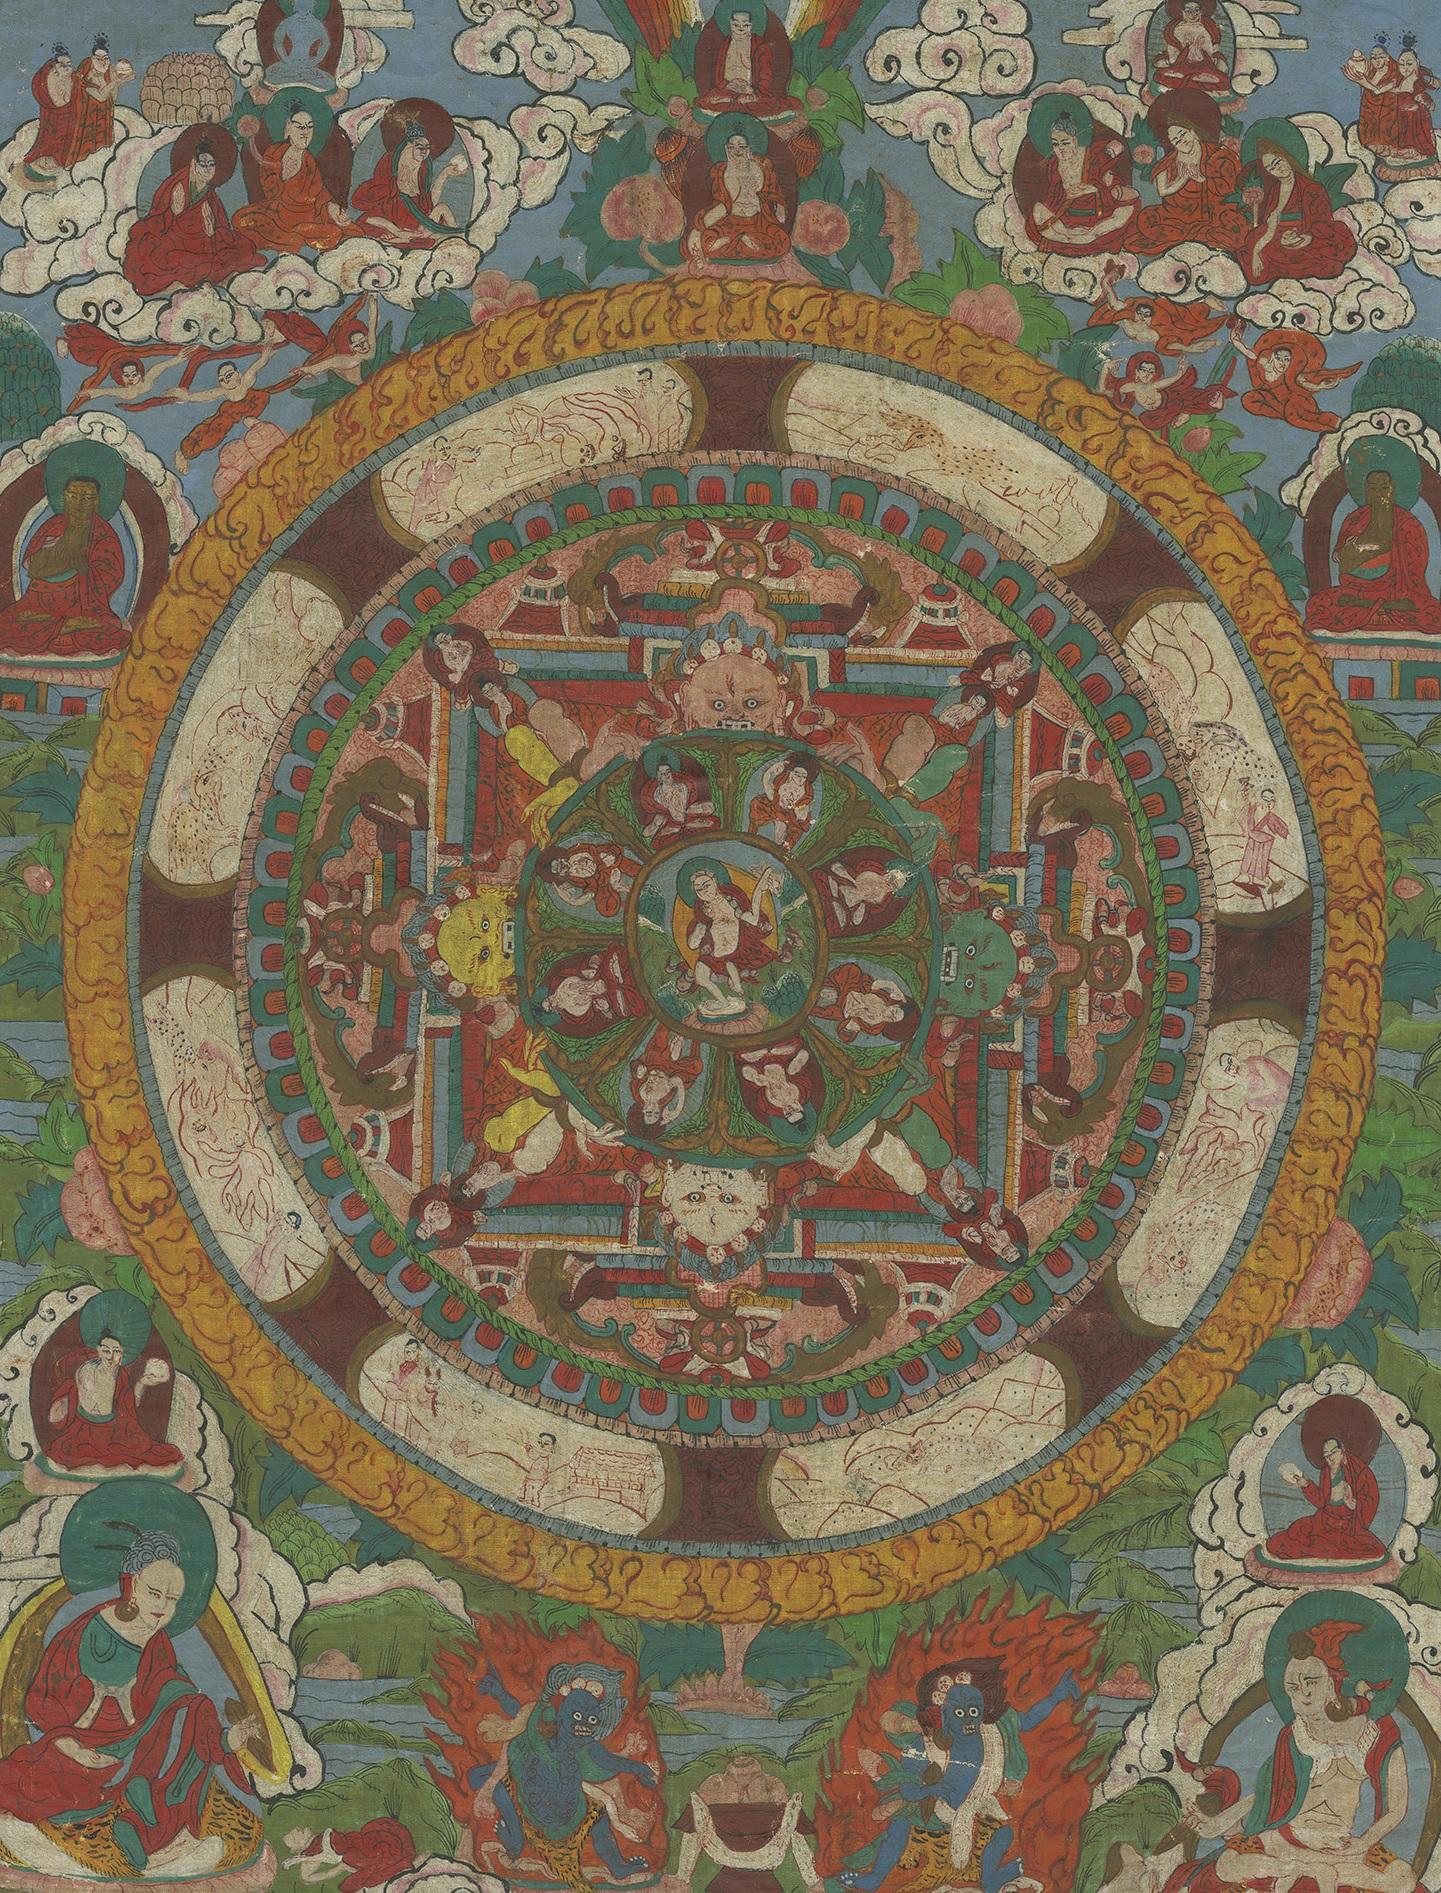 Beautiful antique mandala thangka. Thangkas are Tibetan scroll paintings. This thangka is painted on fabric and depicts a mandala and associated deities. Published early 20th century.